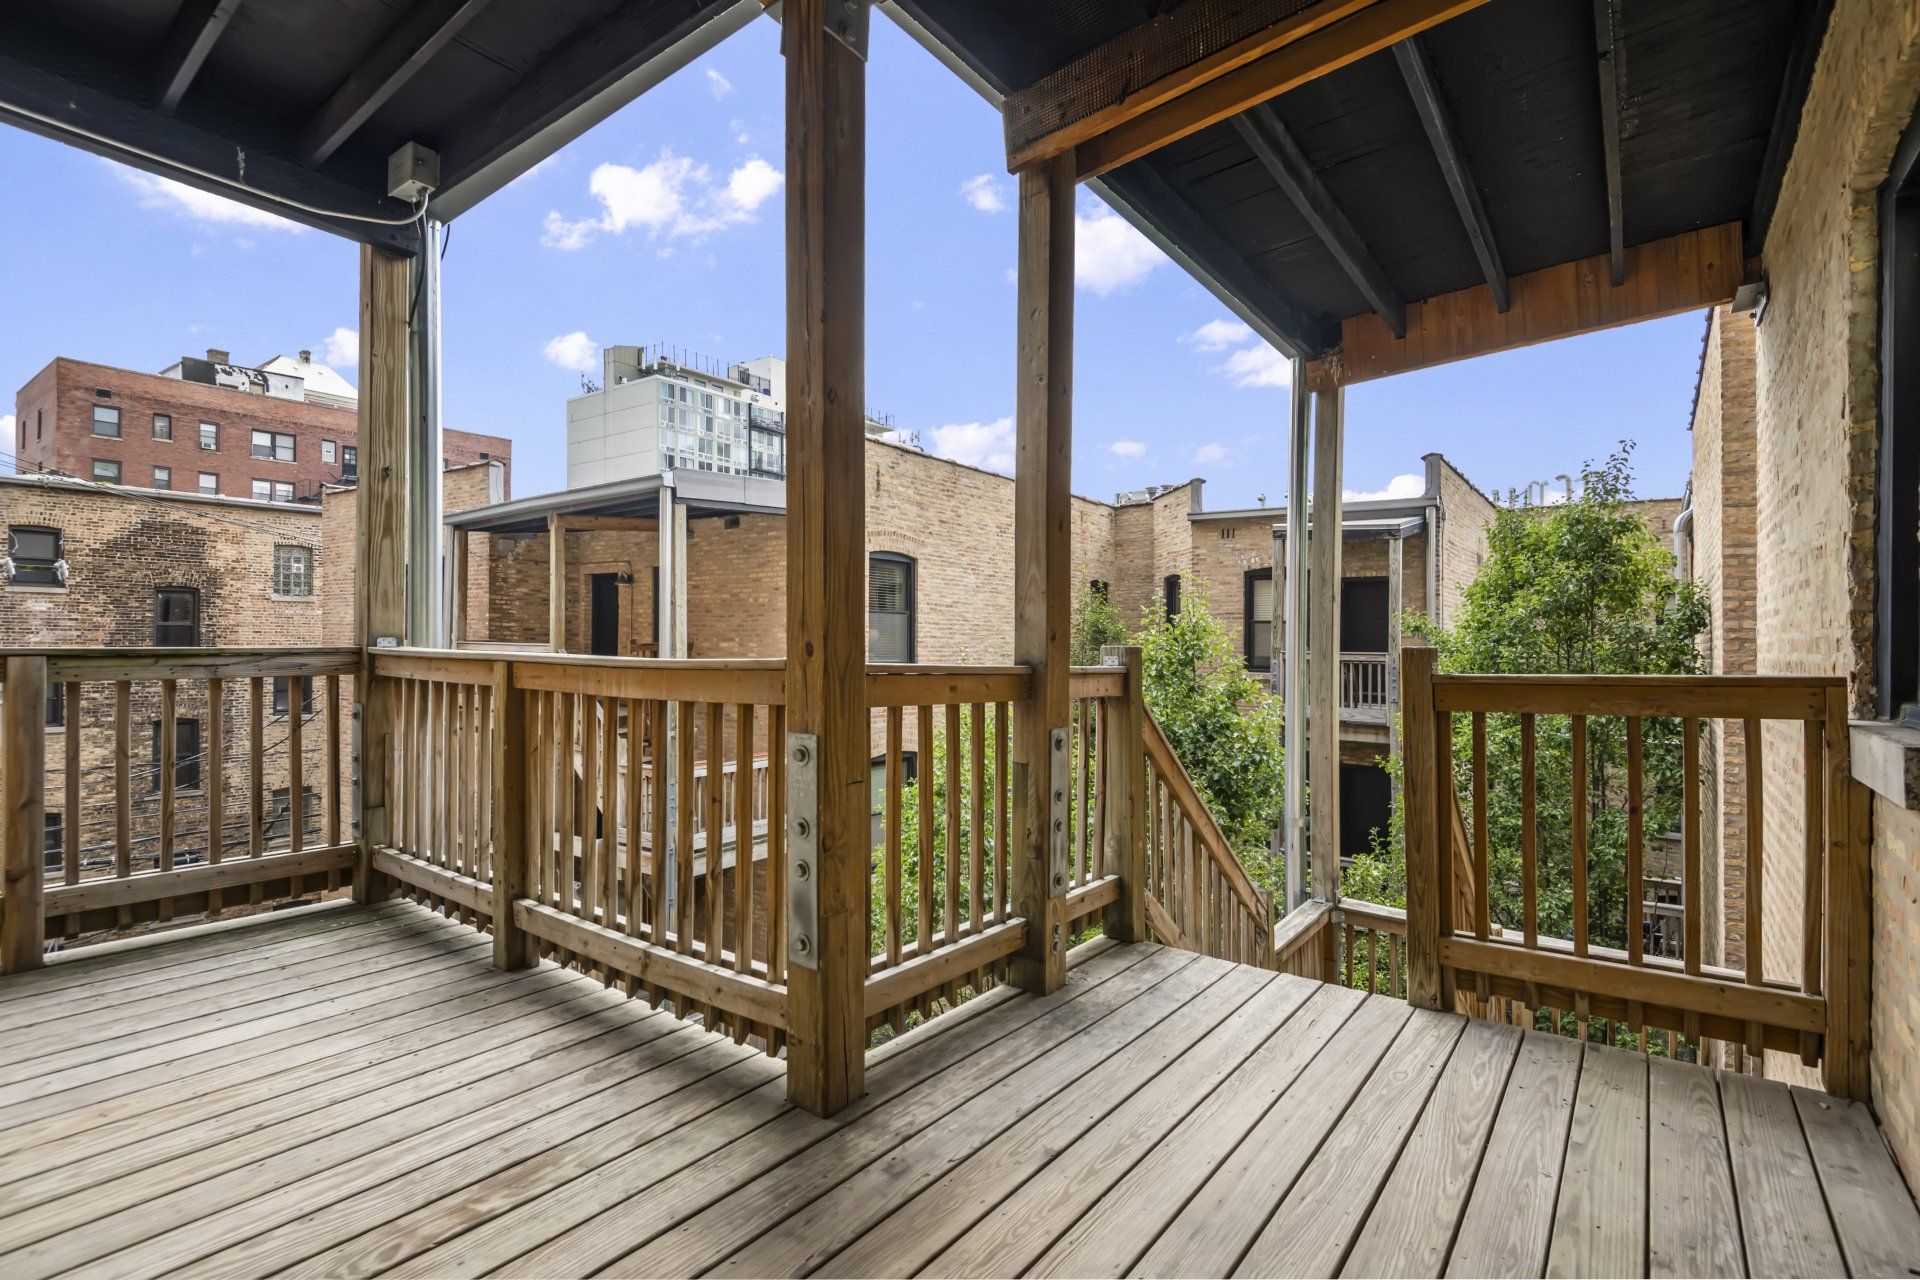 An empty deck with a wooden railing and a view of a city.